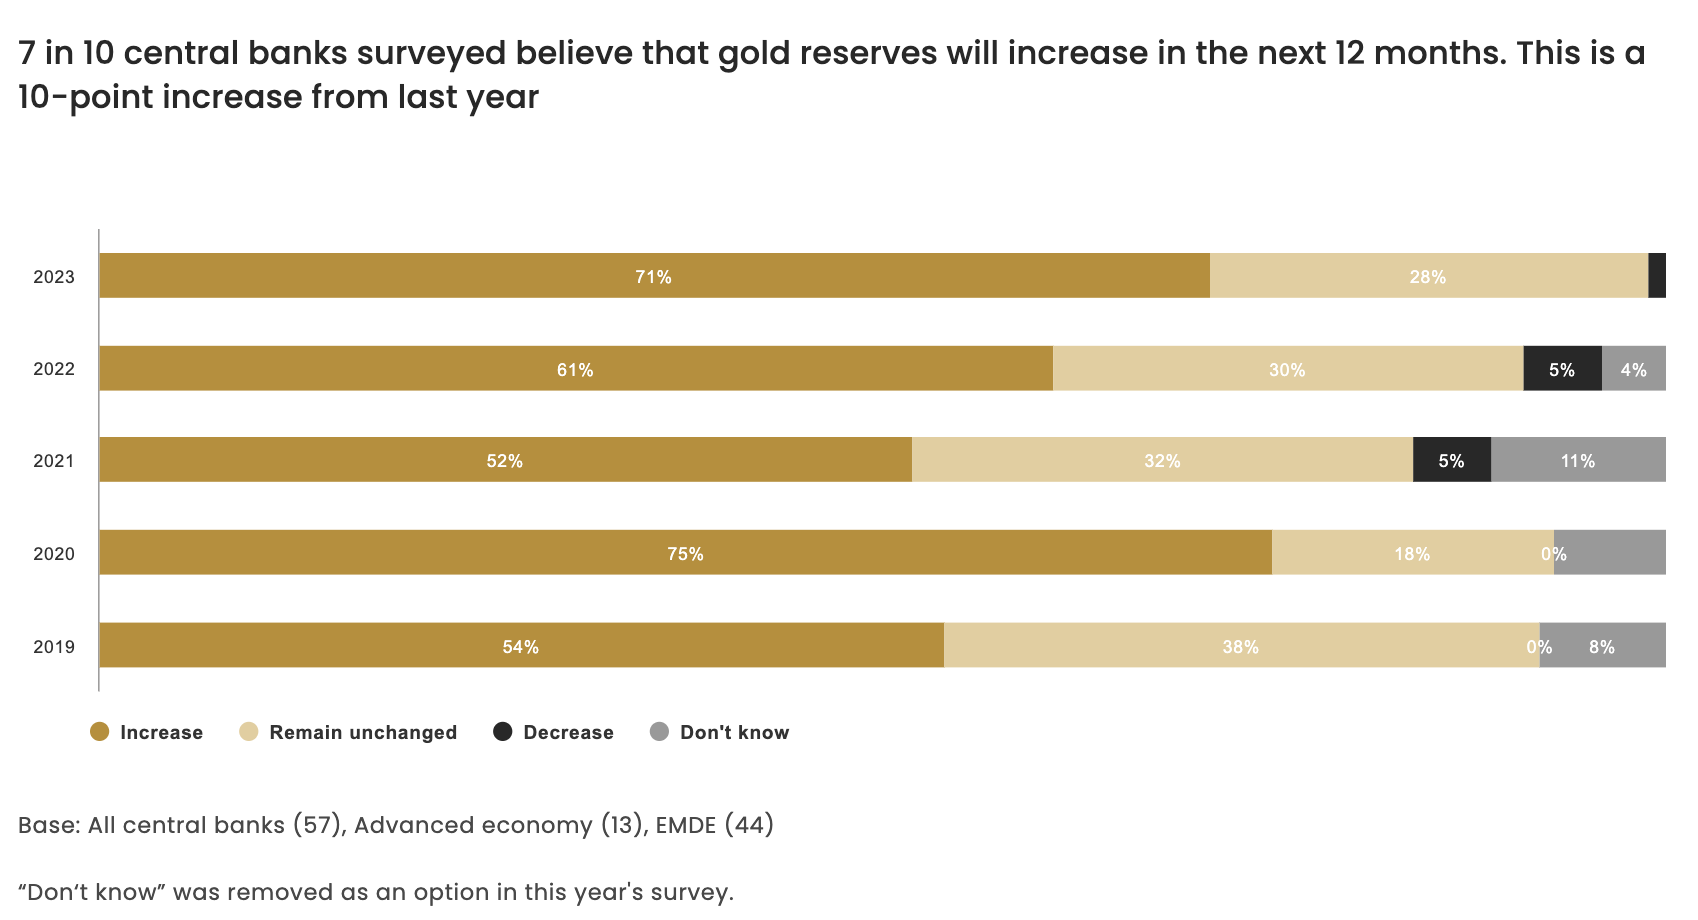 bar chart showing positive survey results on central bank gold interest over next year